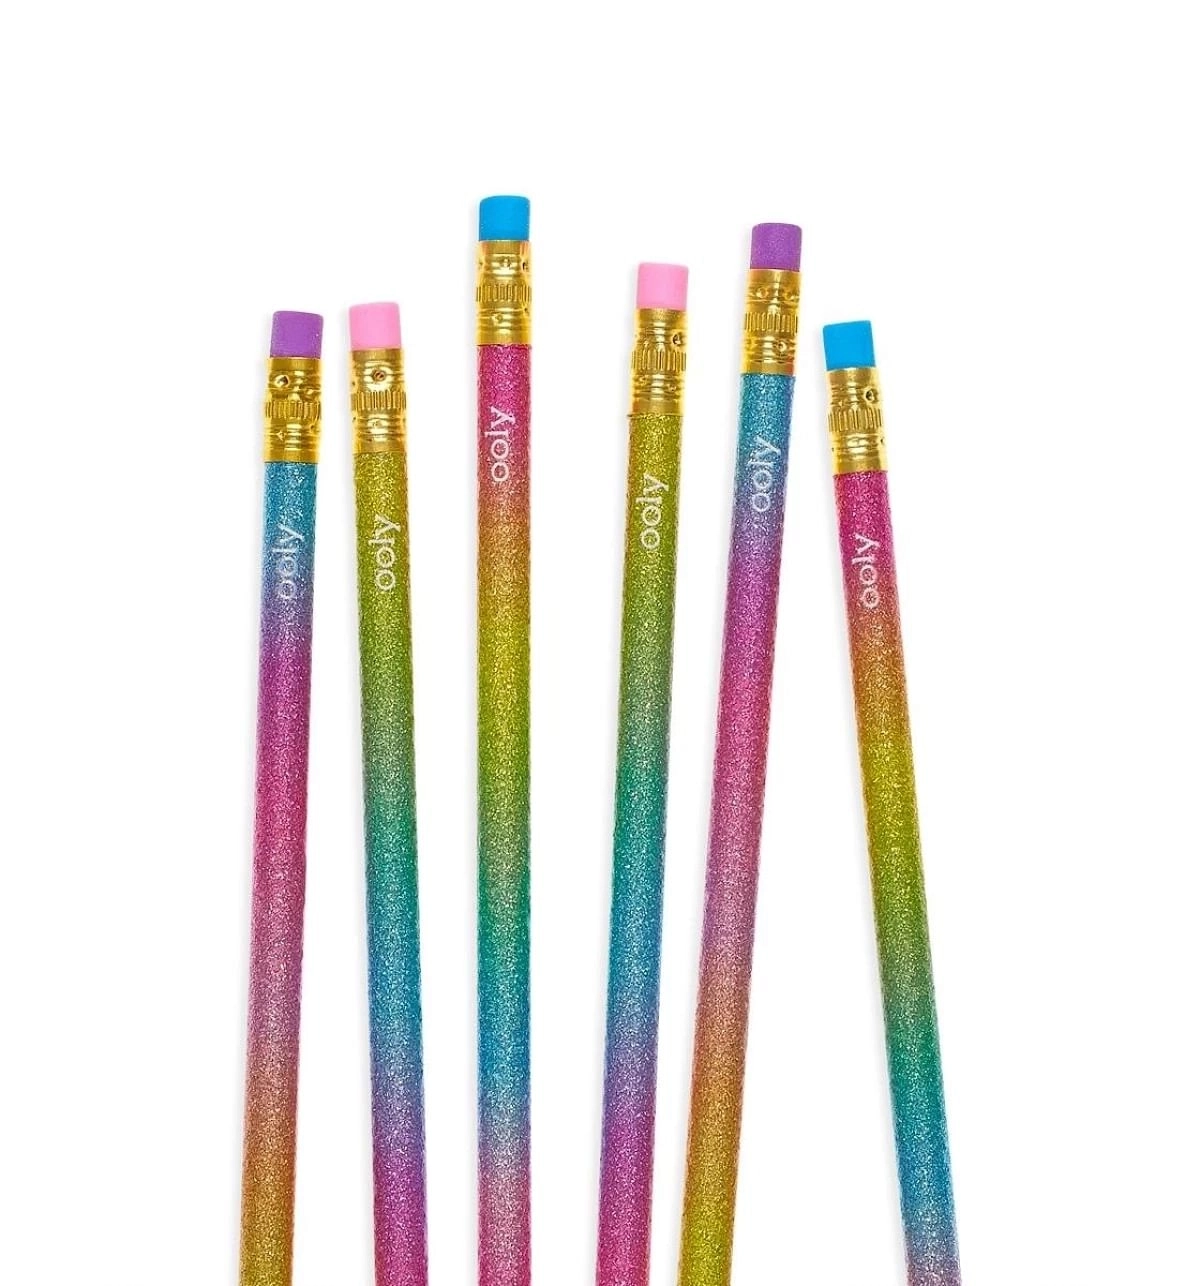 OOLY Oh My Glitter, Graphite Pencils set of 6 Multicolour 6Y+